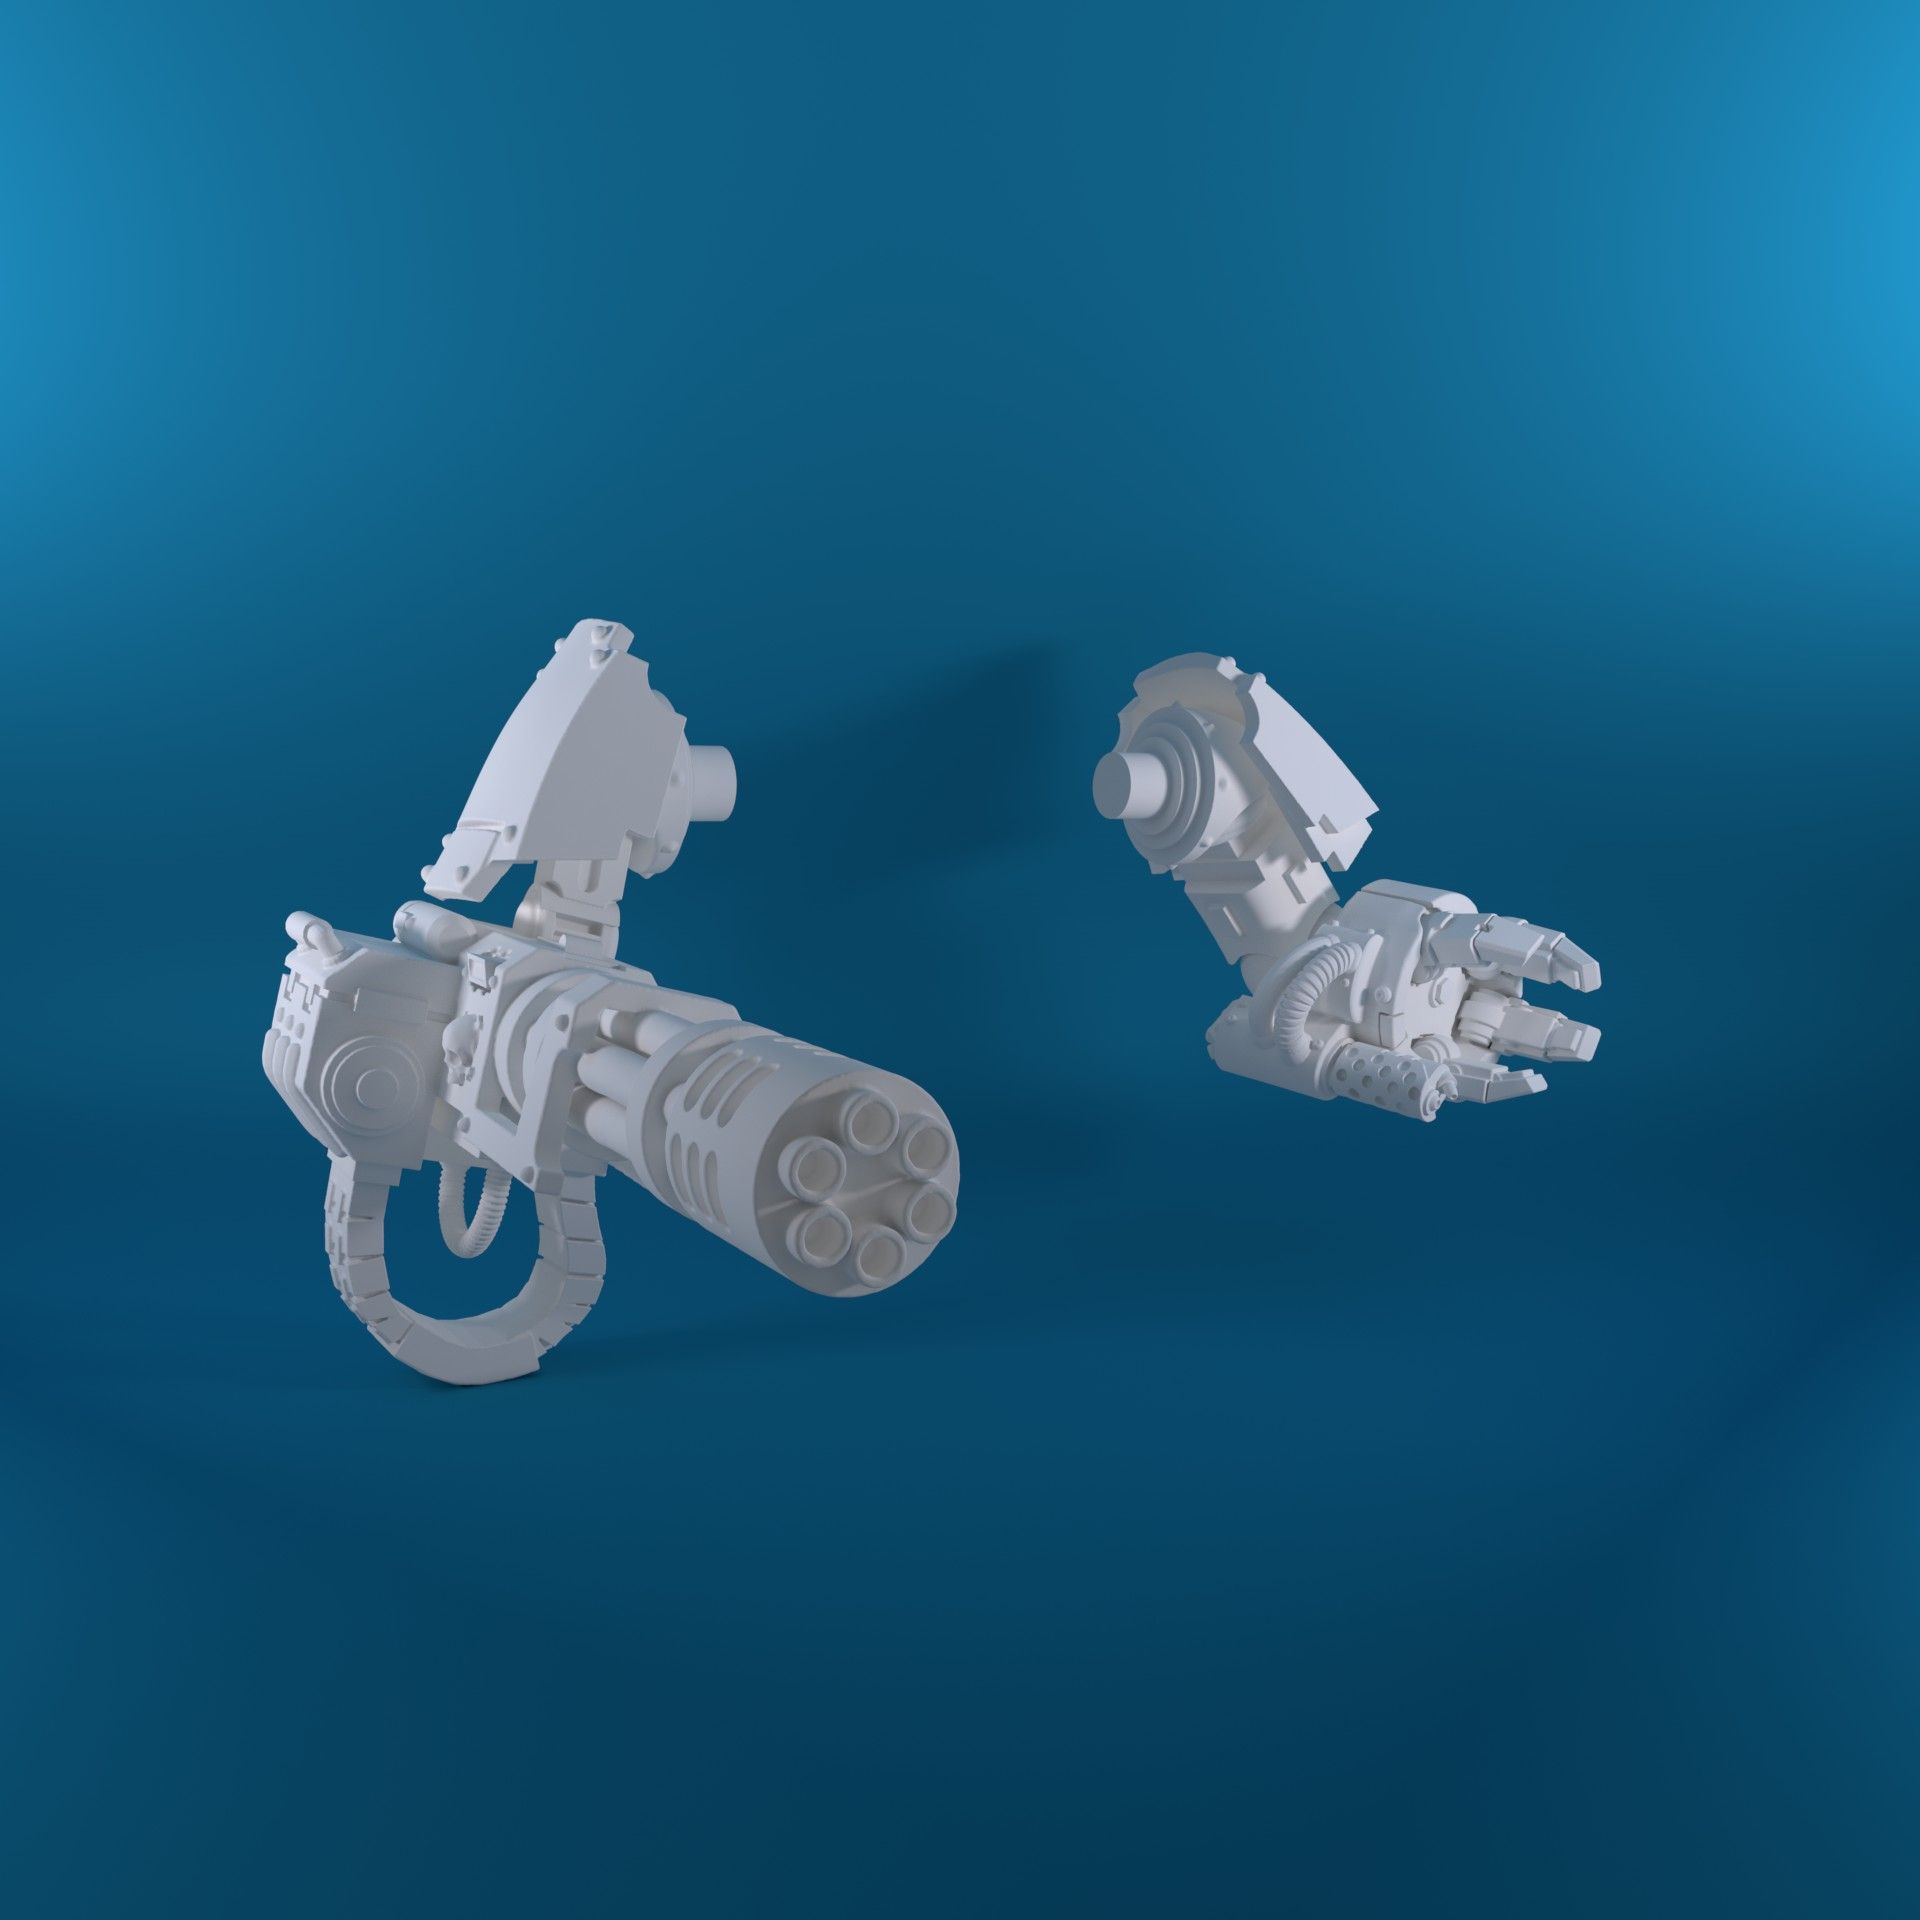 render_reload_arms.jpg Download file dreadnought arms equipped with the gatling gun and the heavy flamethrower • 3D printer model, 3d-fabric-jean-pierre